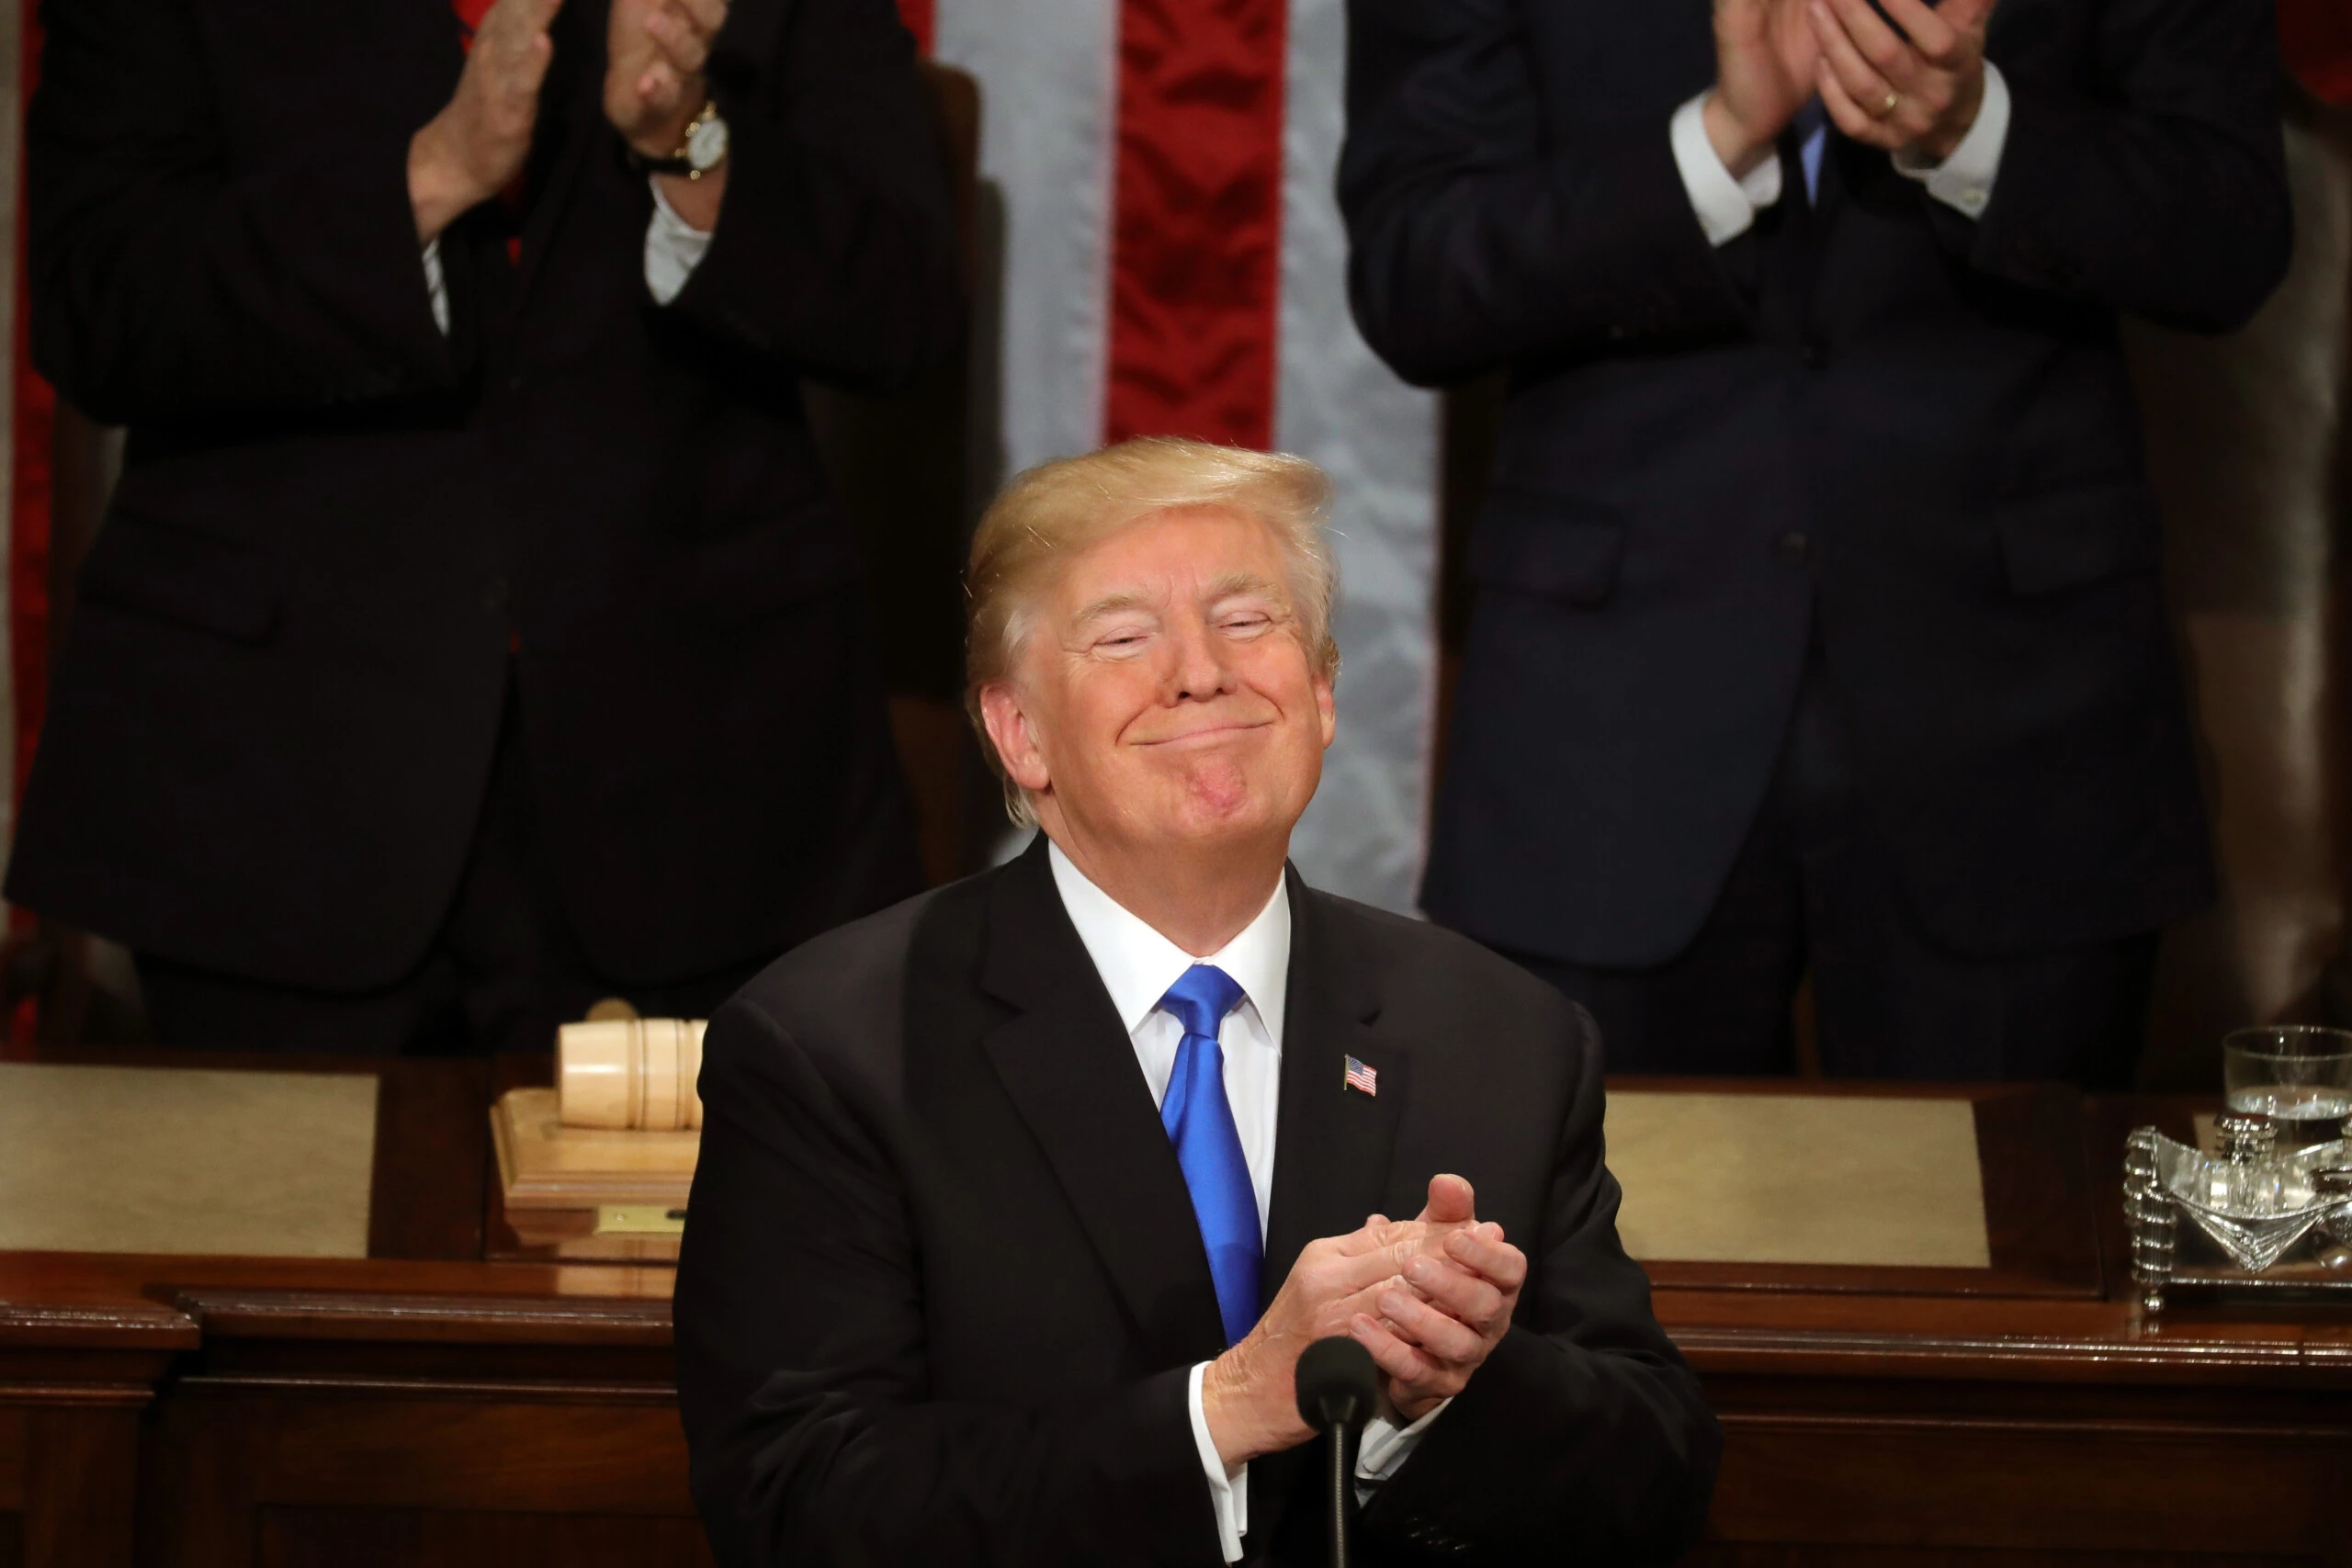 WASHINGTON, DC - JANUARY 30:  U.S. President Donald J. Trump claps during the State of the Union address in the chamber of the U.S. House of Representatives January 30, 2018 in Washington, DC. This is the first State of the Union address given by U.S. President Donald Trump and his second joint-session address to Congress.  (Photo by Chip Somodevilla/Getty Images)